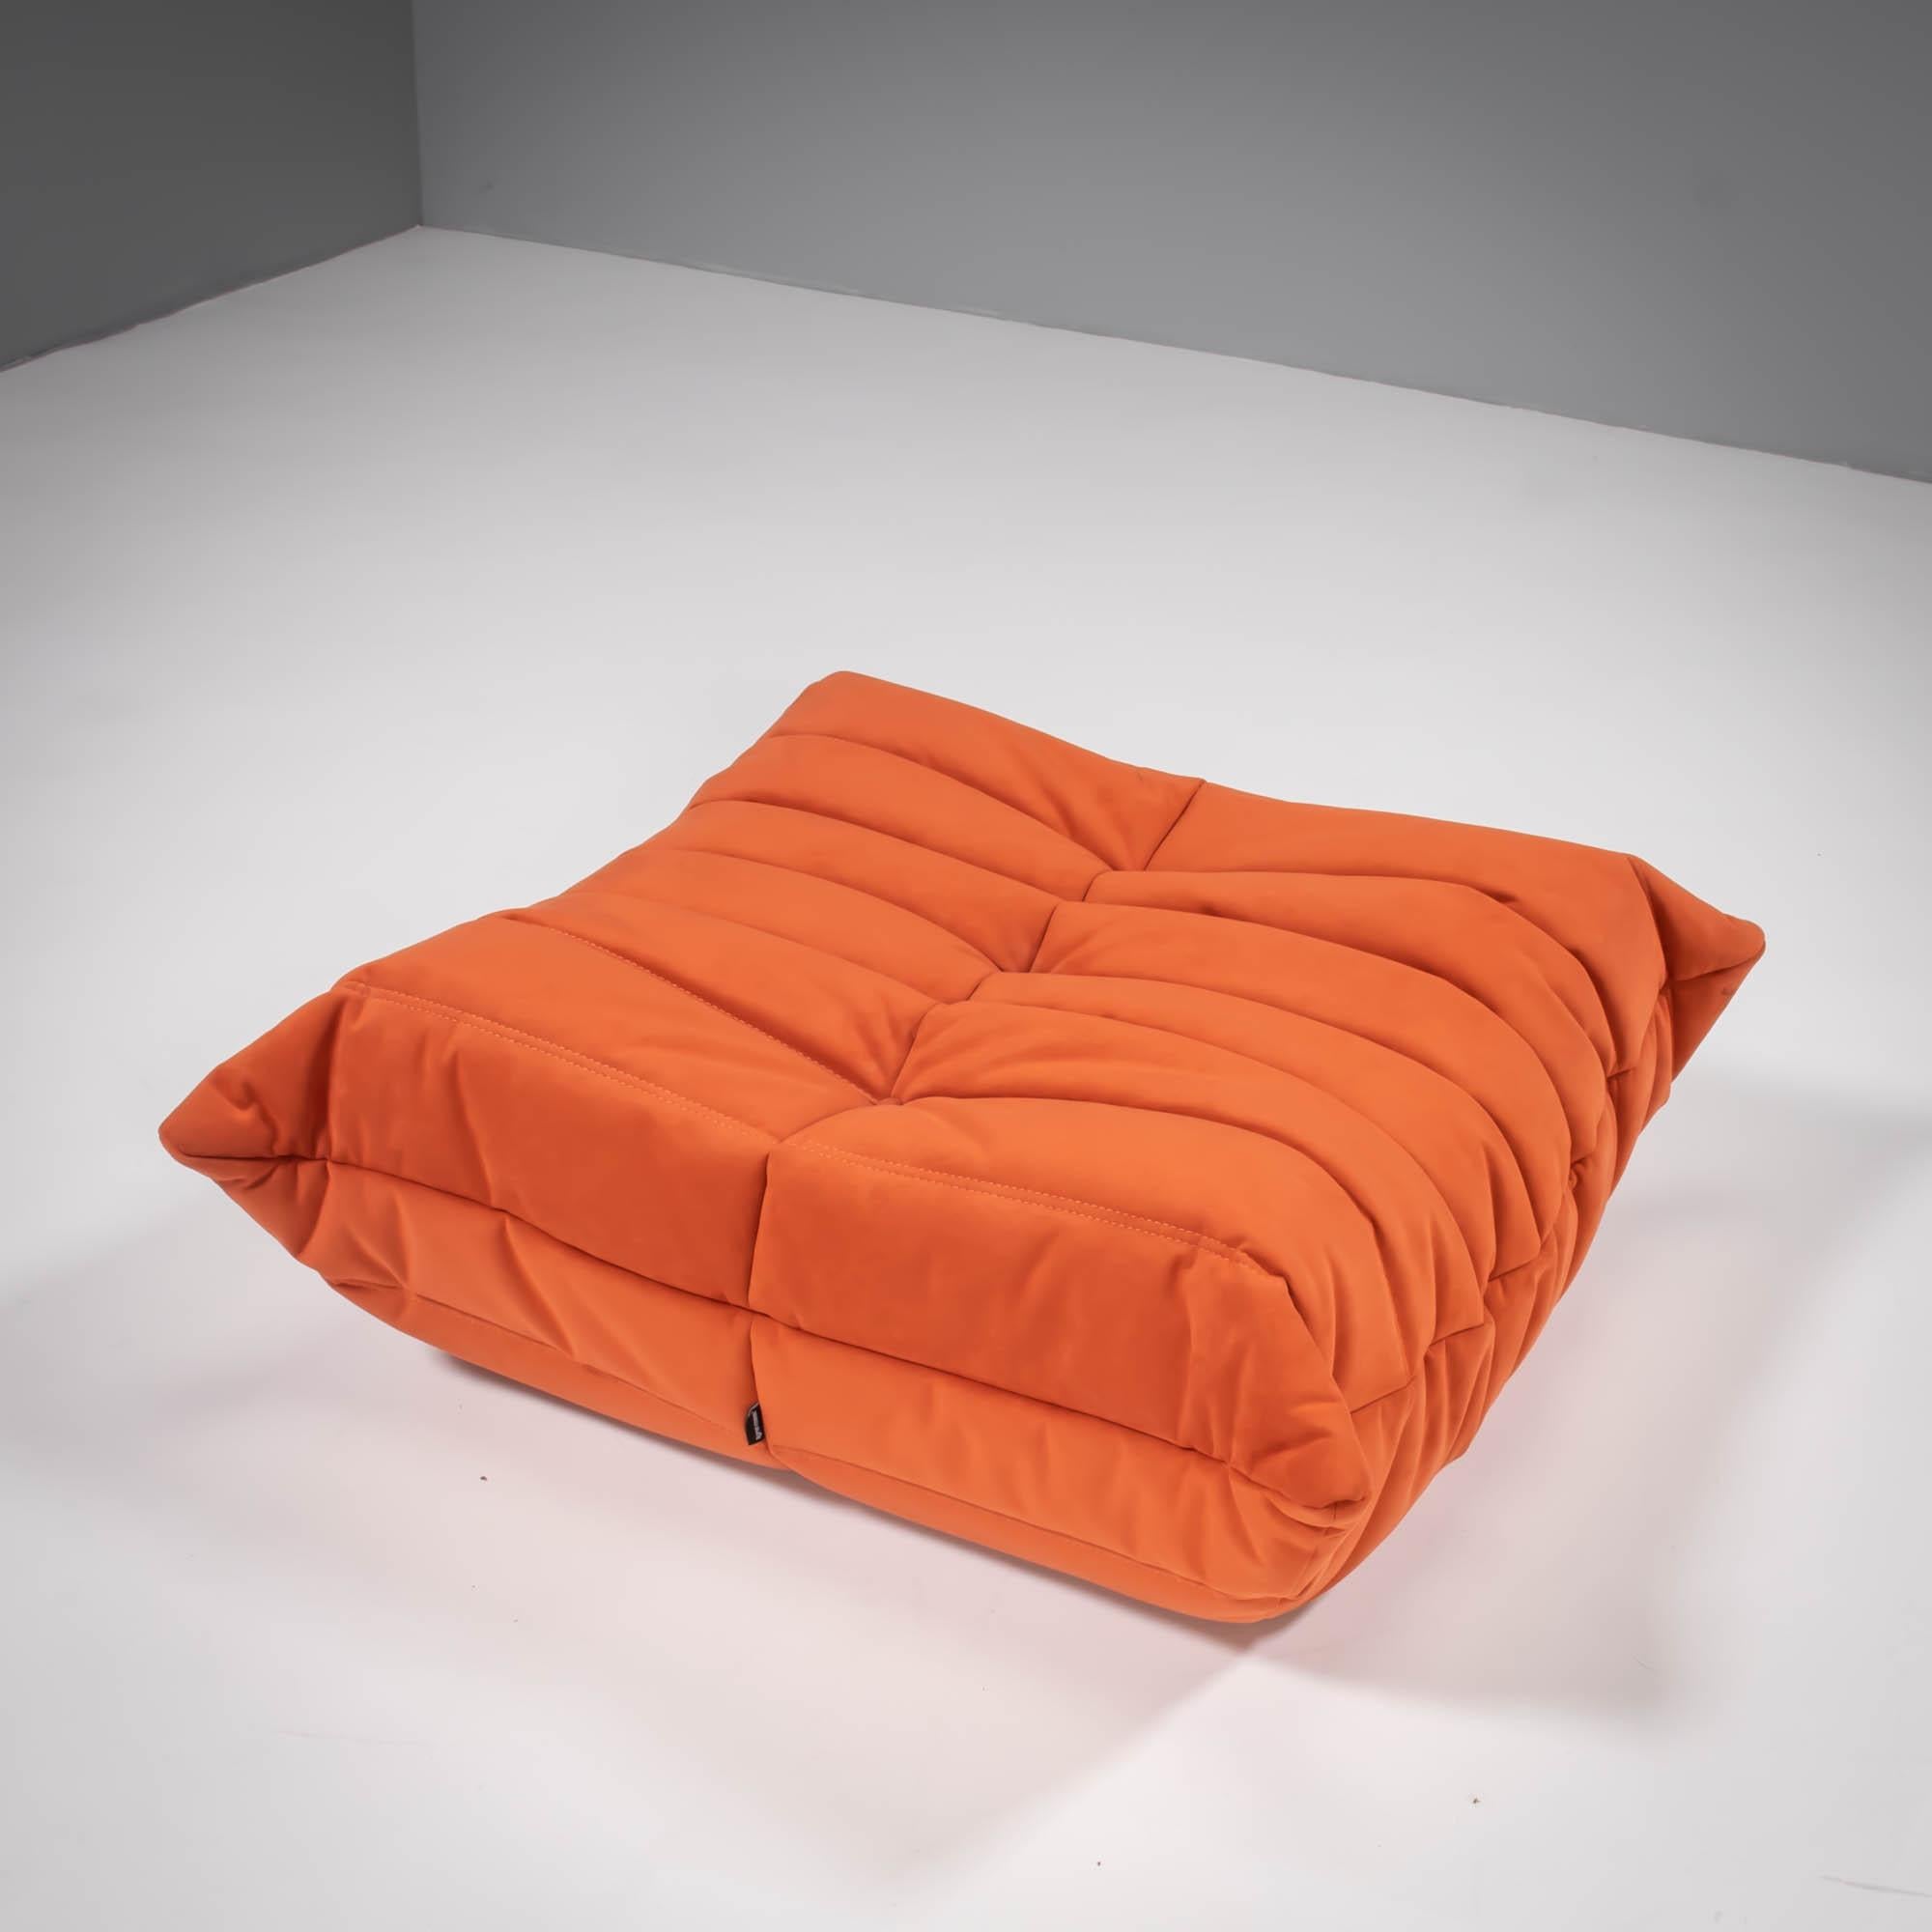 The iconic Togo sofa, originally designed by Michel Ducaroy for Ligne Roset in 1973 has become a design Classic.

The footstool features cadmium orange upholstery and the instantly recognizable pleated fabric design, which gives the sofa its